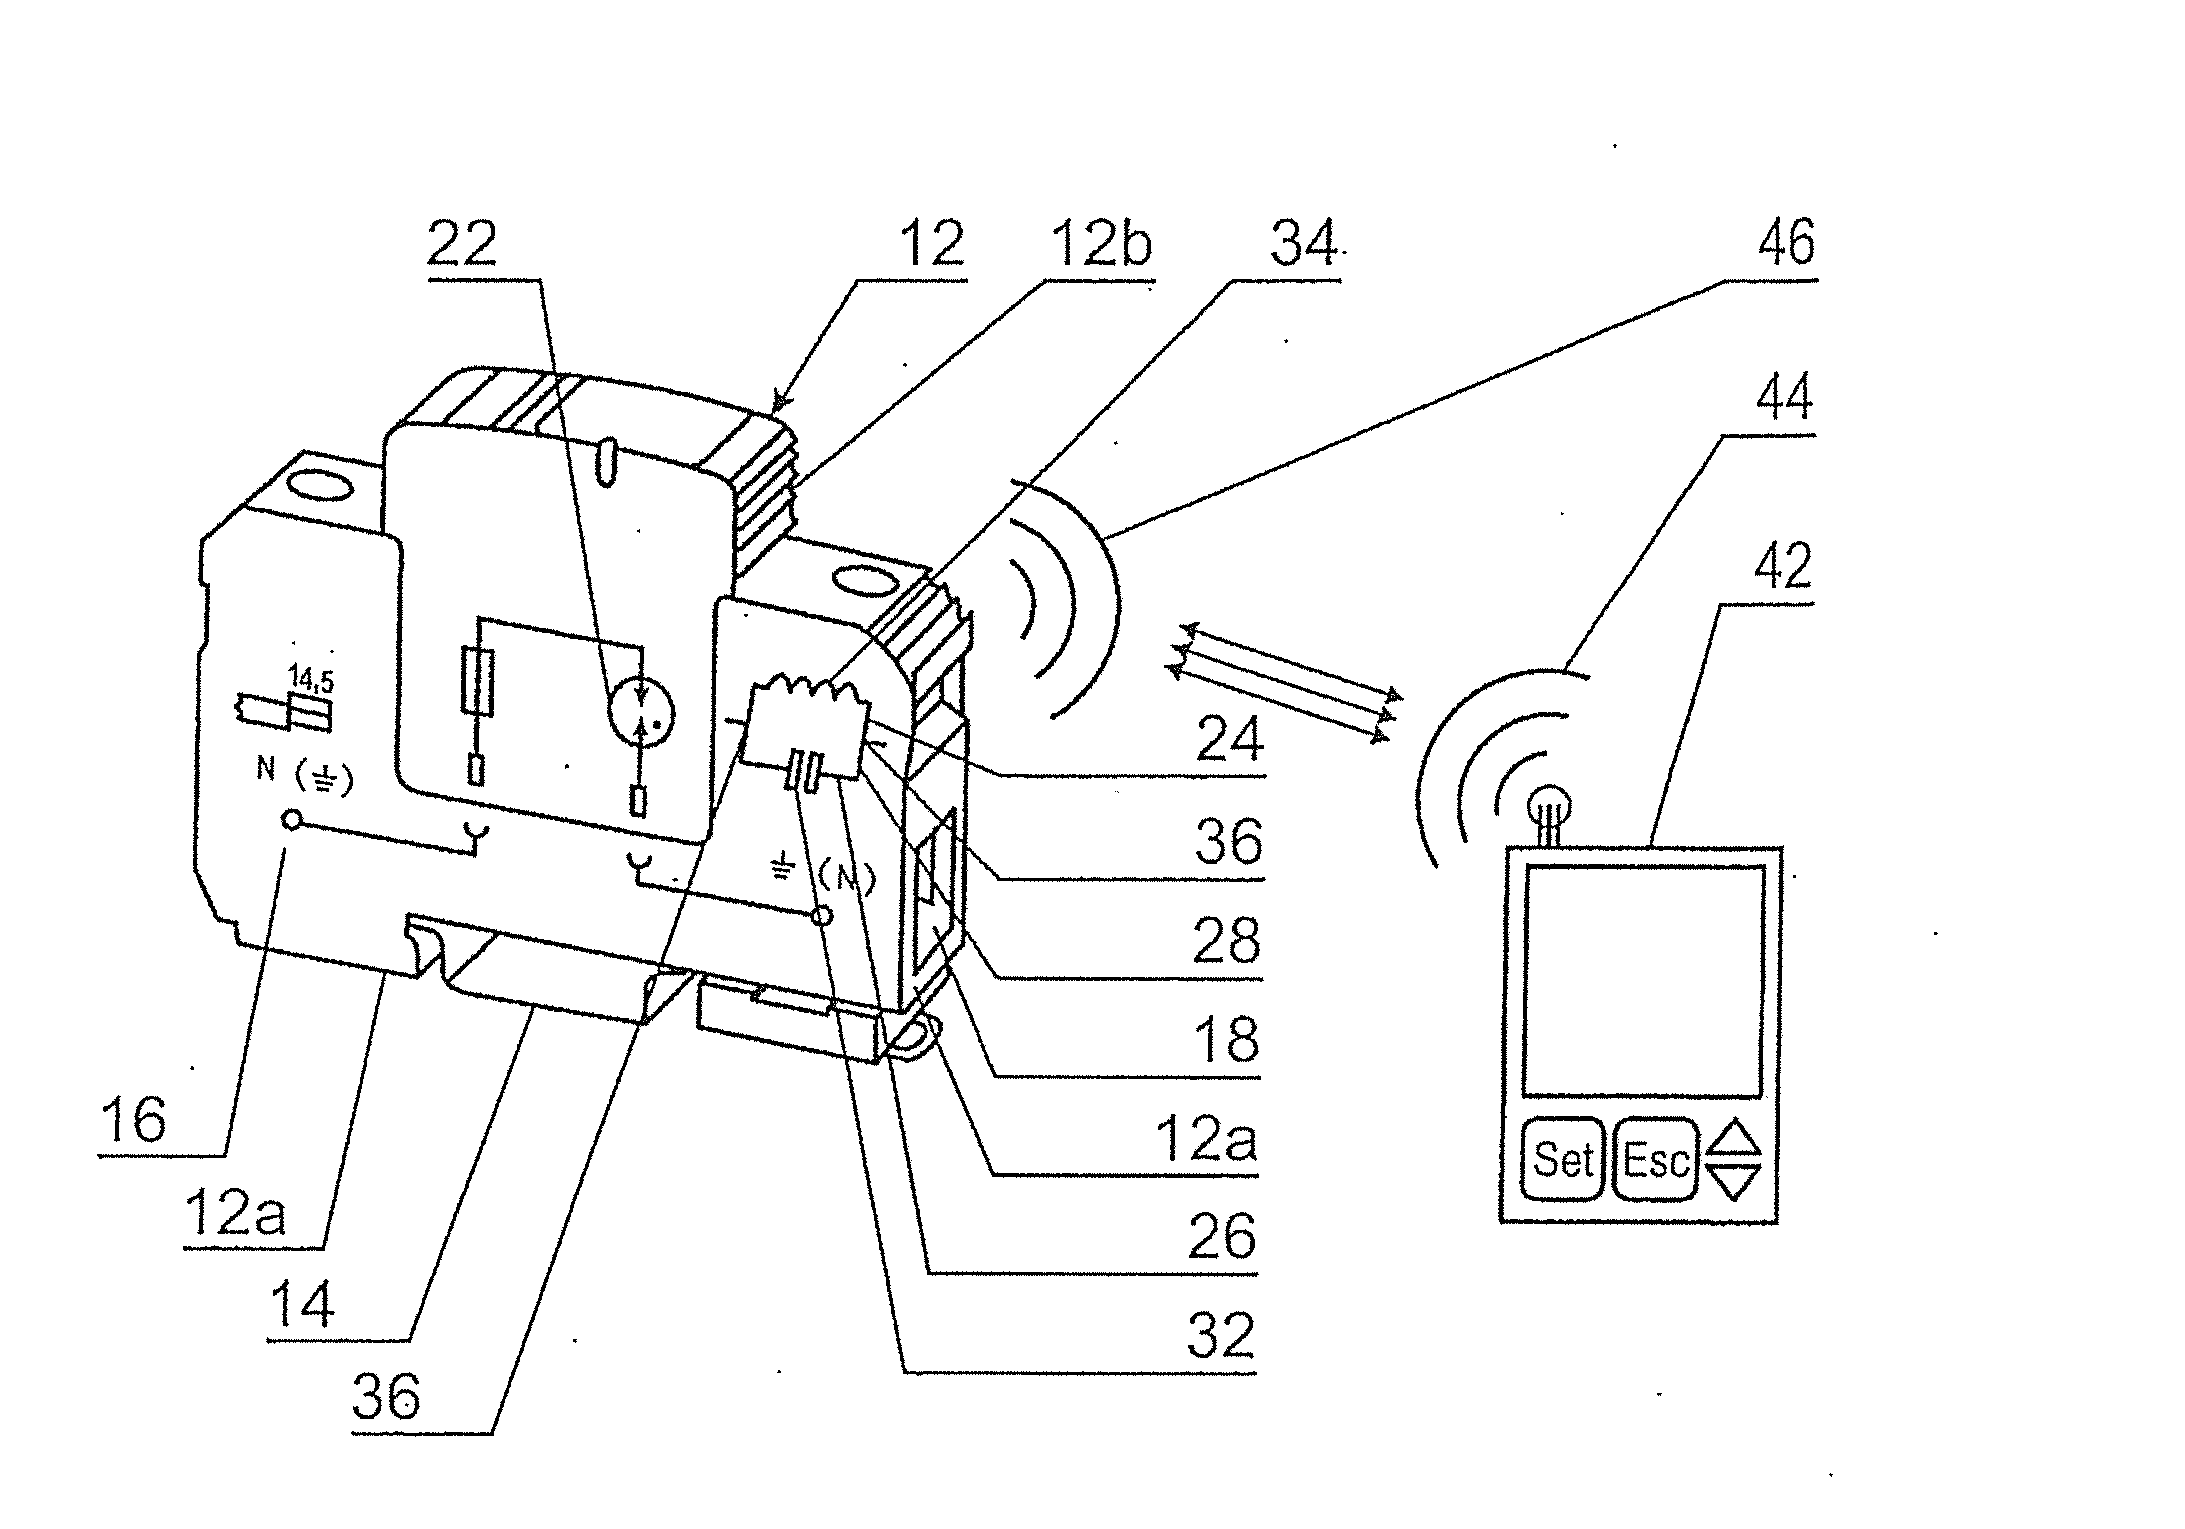 State Monitoring or Diagnostics System